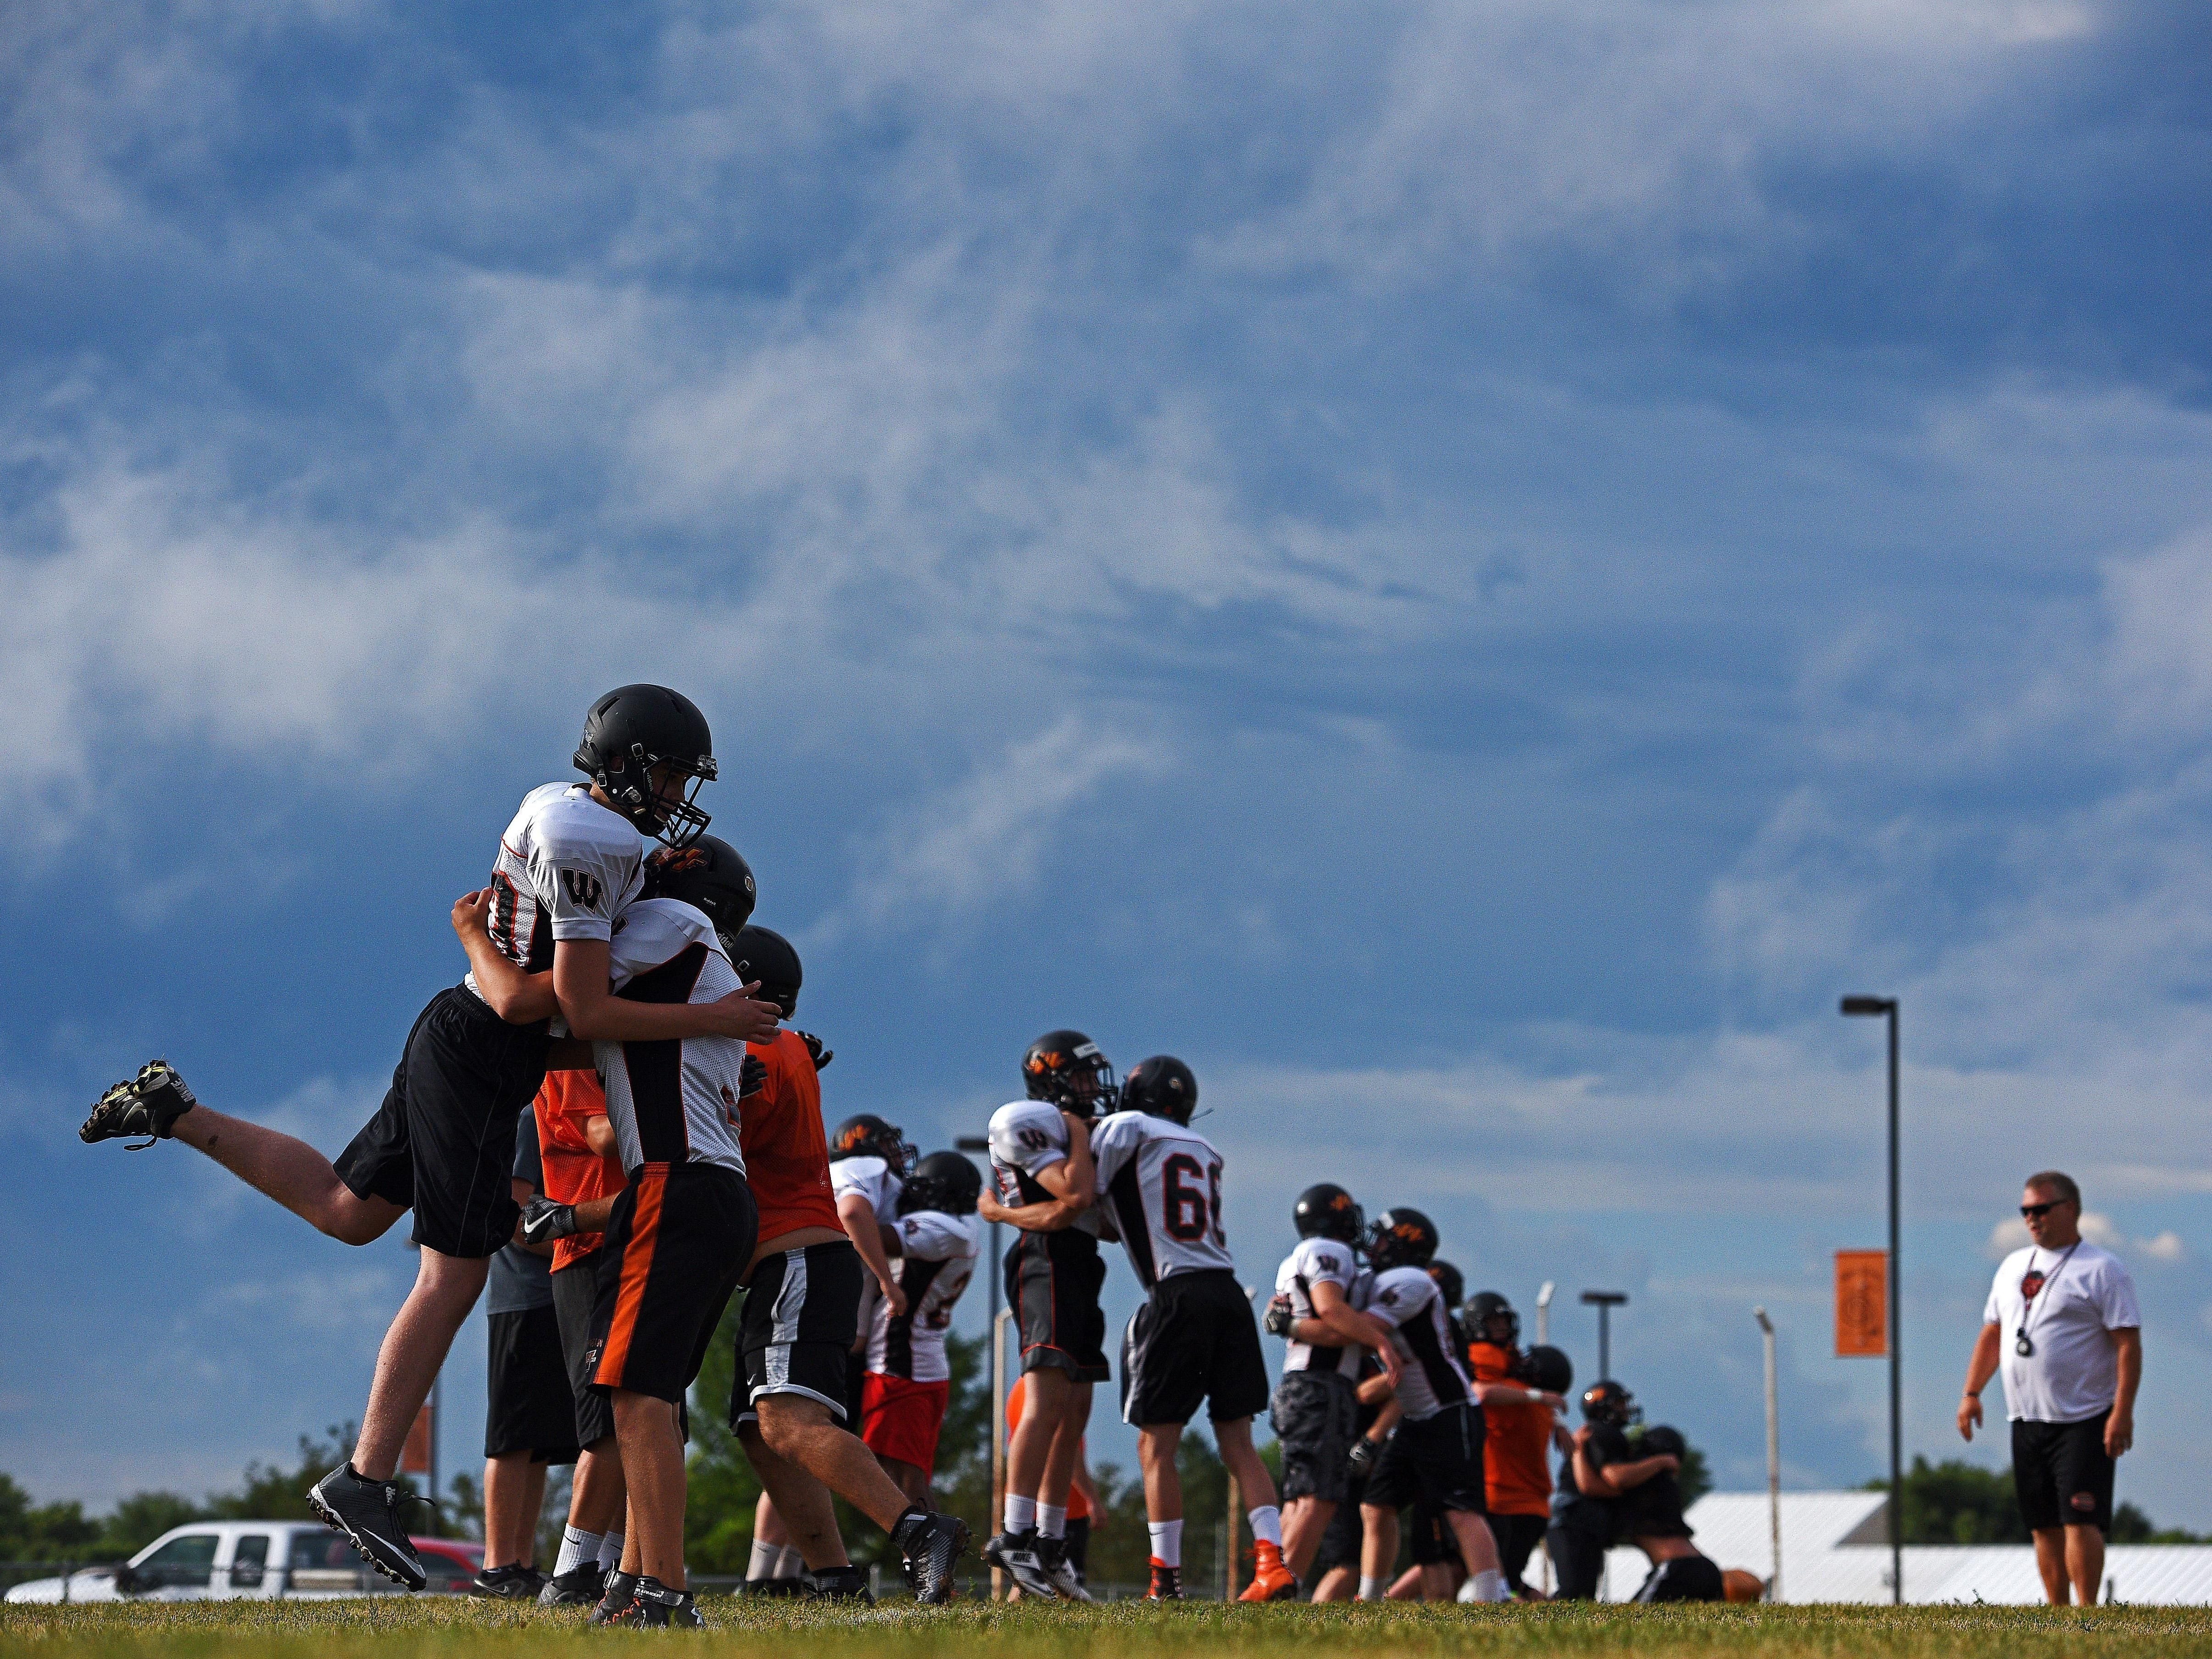 Washington High School football players, including Cody Jennings (83), far left, and Dillon Gard (3), second from left, take part in a drill during a Washington High School Football Practice Thursday, Aug. 11, 2016, at Washington High School in Sioux Falls.